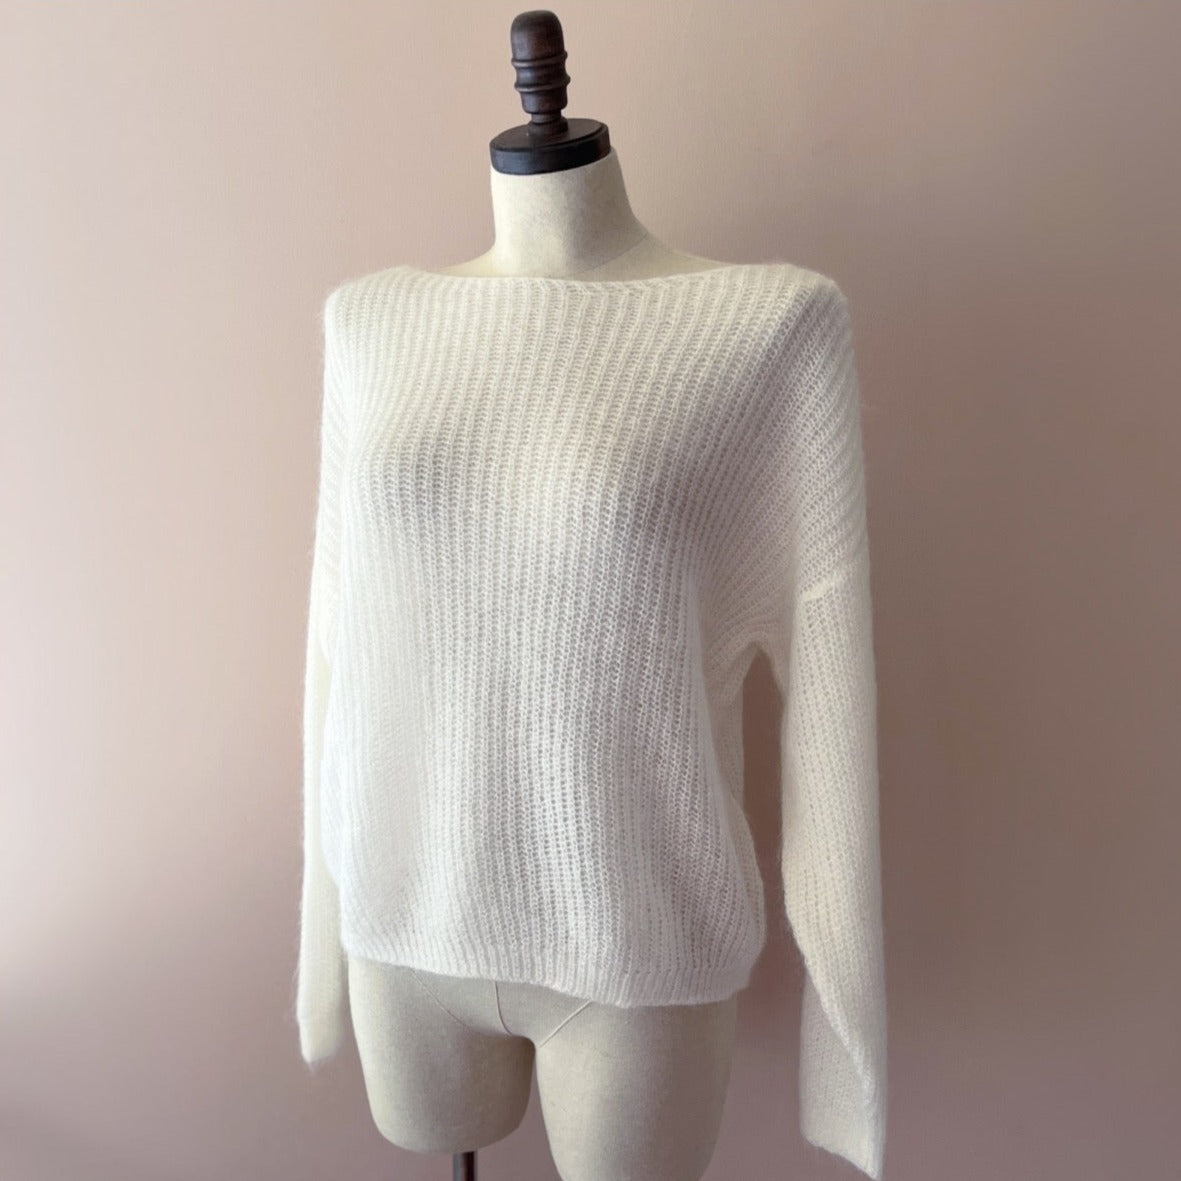 slouchy boho style Oversized wool top, Soft and airy, Fuzzy texture, Machine knit, Merino blend, Relaxed fit, Boat neckline, Extra long sleeves, Boho-style, 2 sizes 4 colors, Vanilla shade, Stretchy knit, Ontario Canada